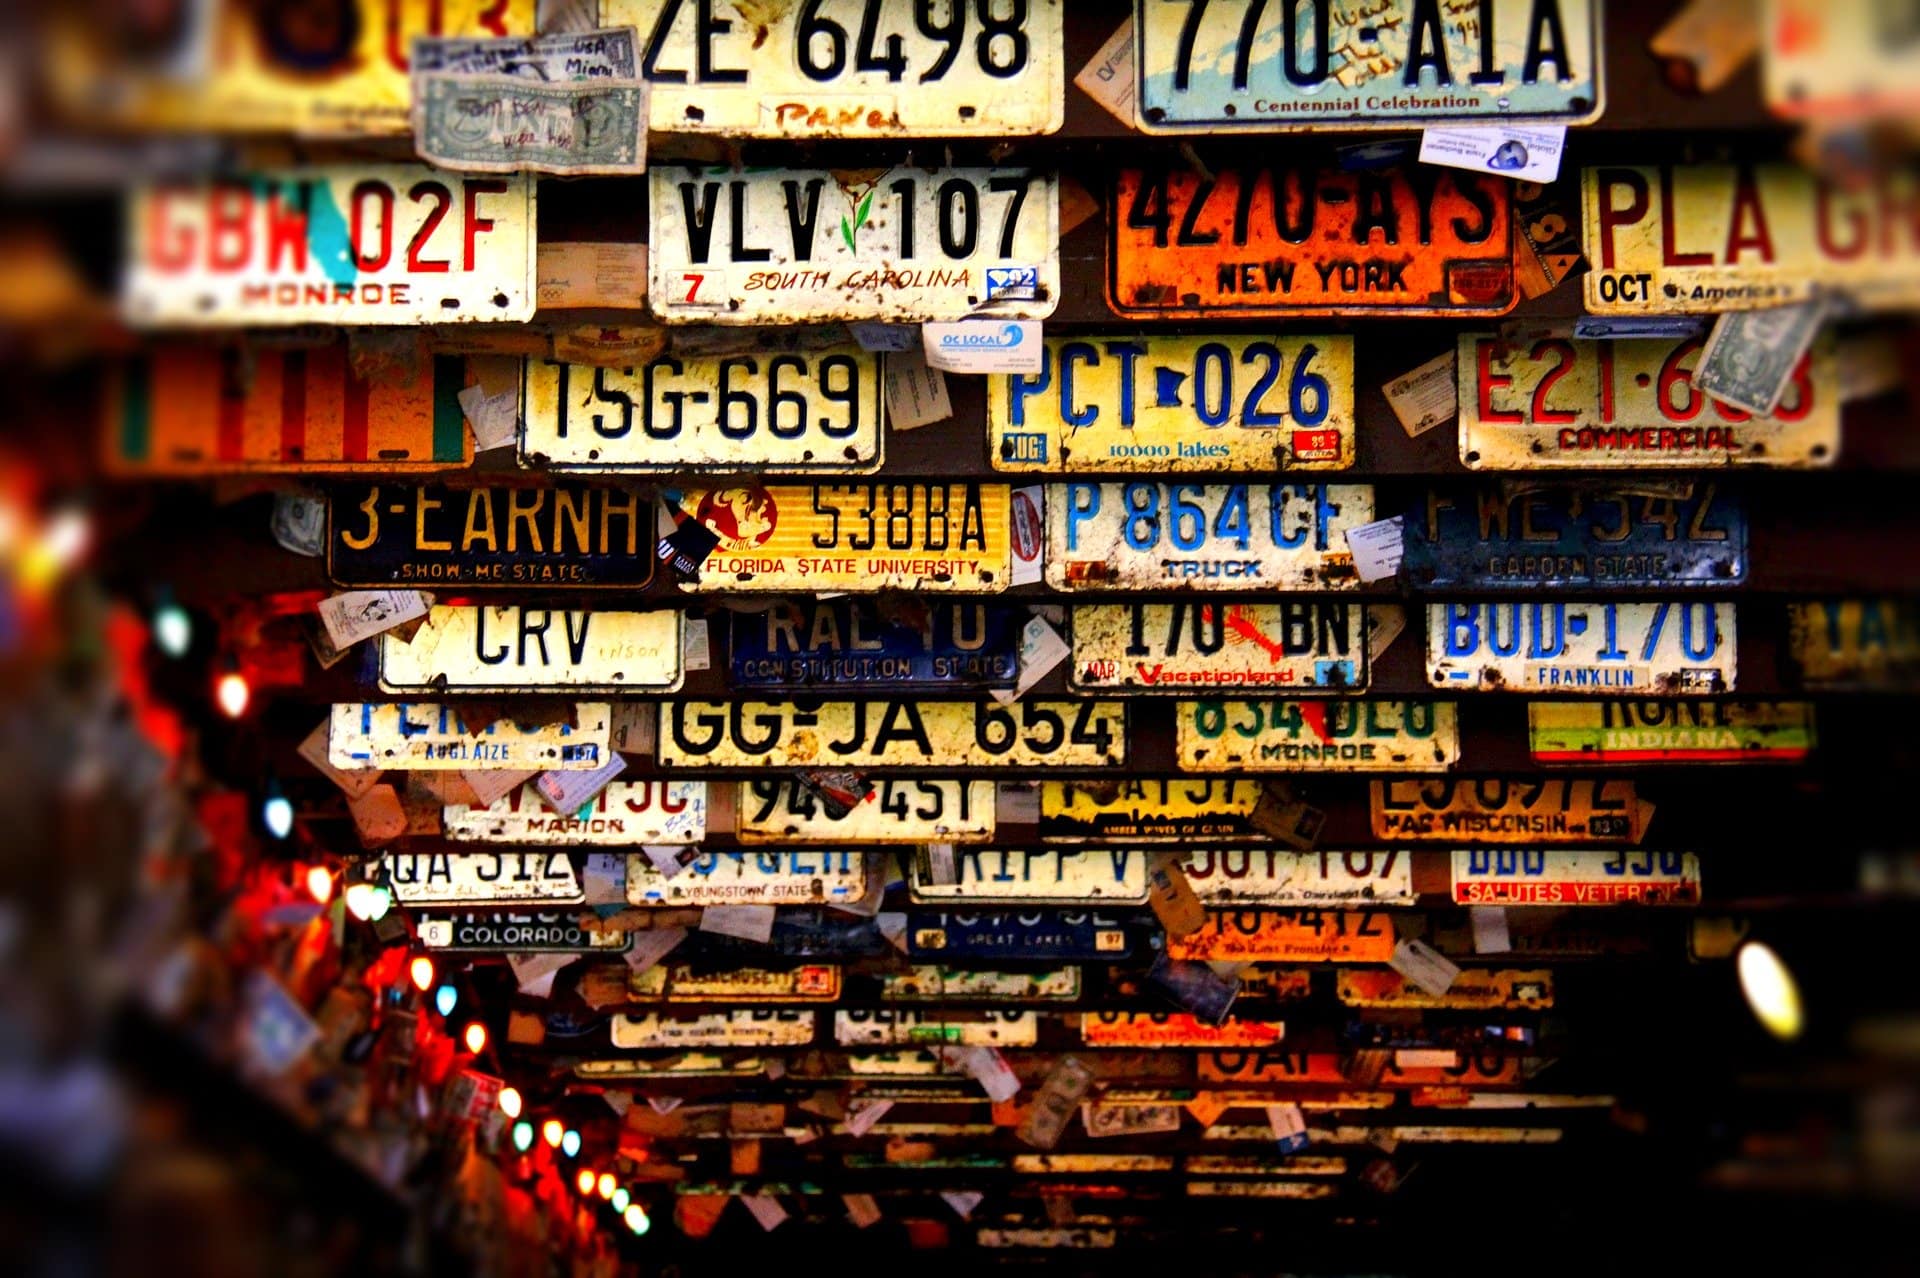 Get a Ceiling Made of Old License Plates